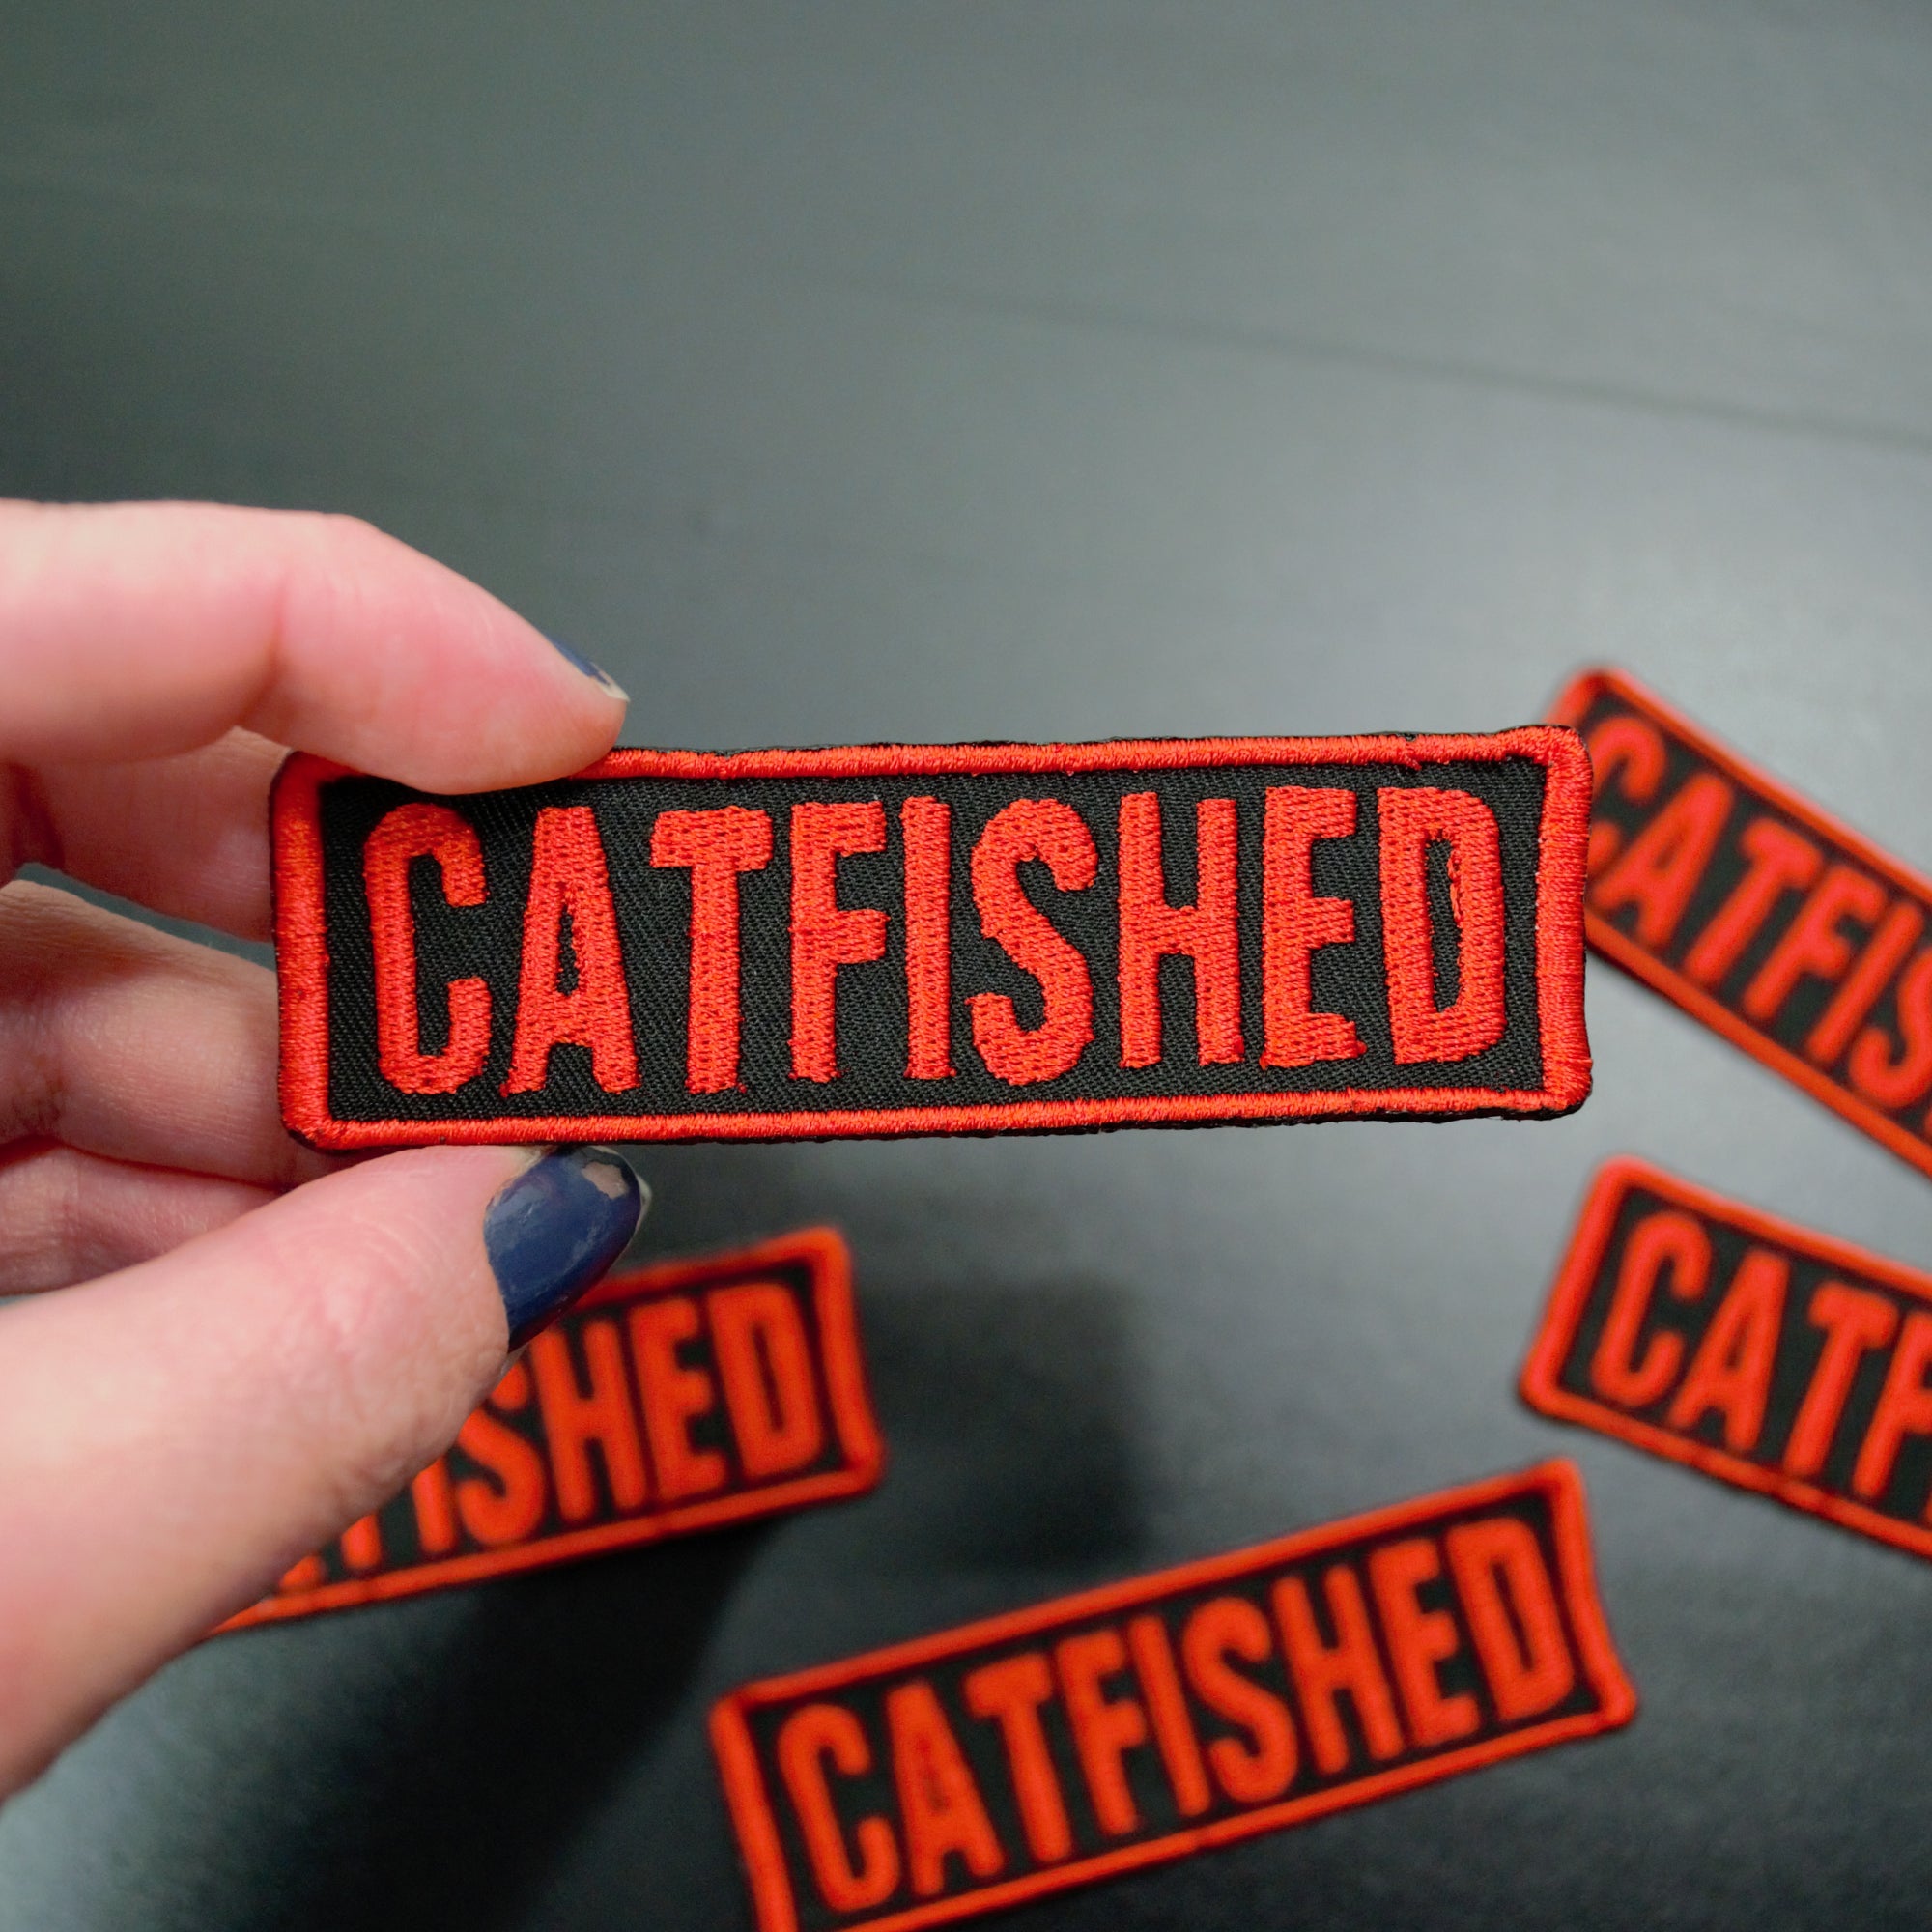 catfished show patch